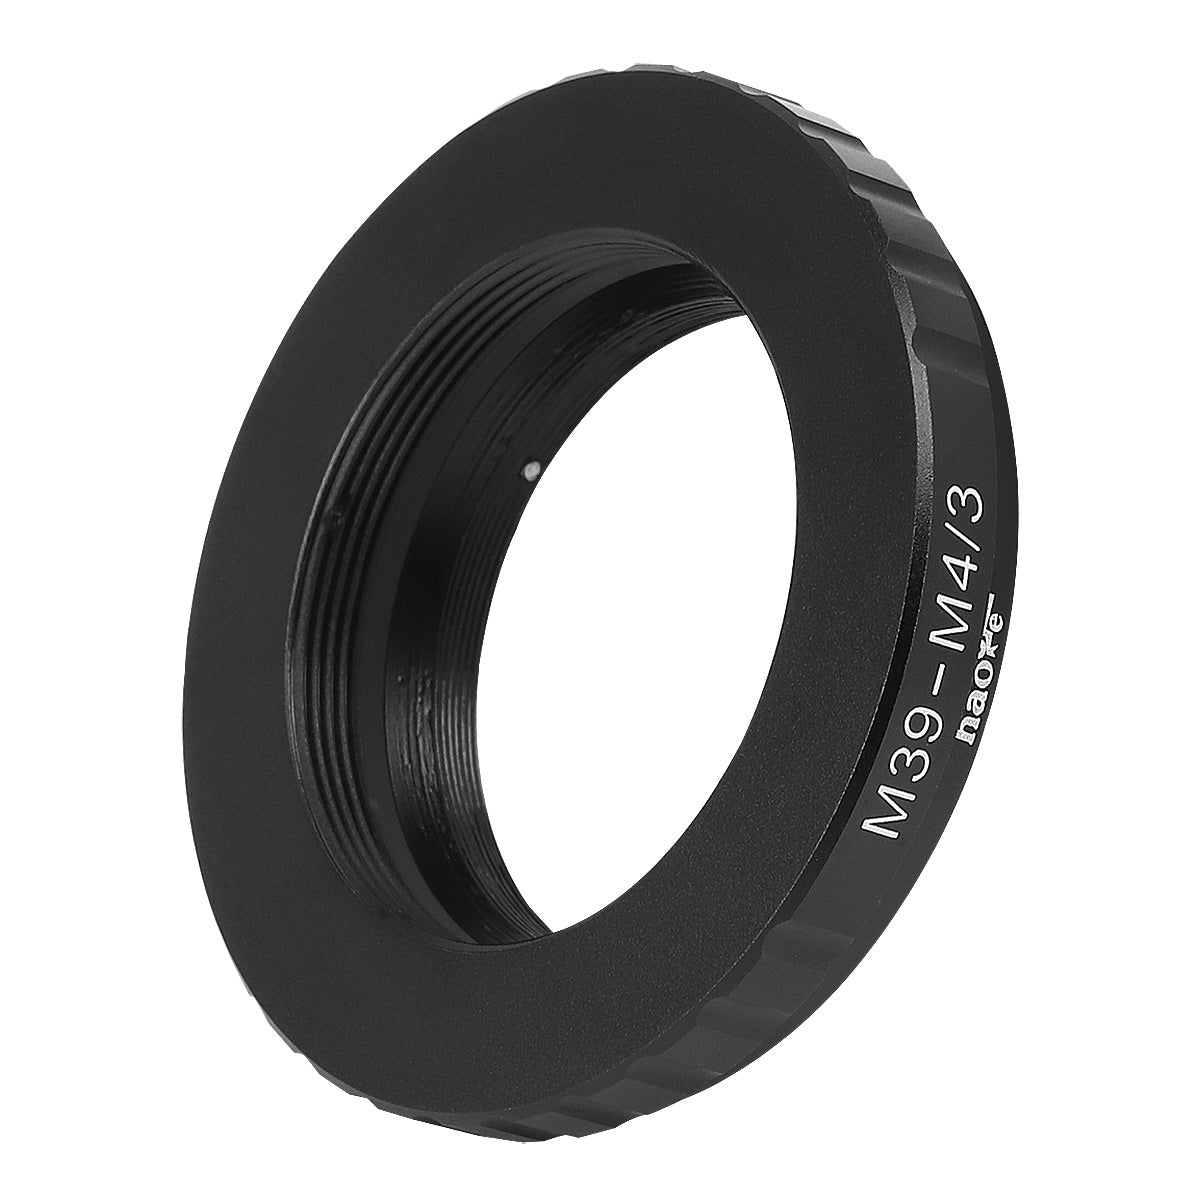 Haoge Manual Lens Mount Adapter for 39mm M39 Mount Lens to Olympus and Panasonic Micro Four Thirds MFT M4/3 M43 Mount Camera